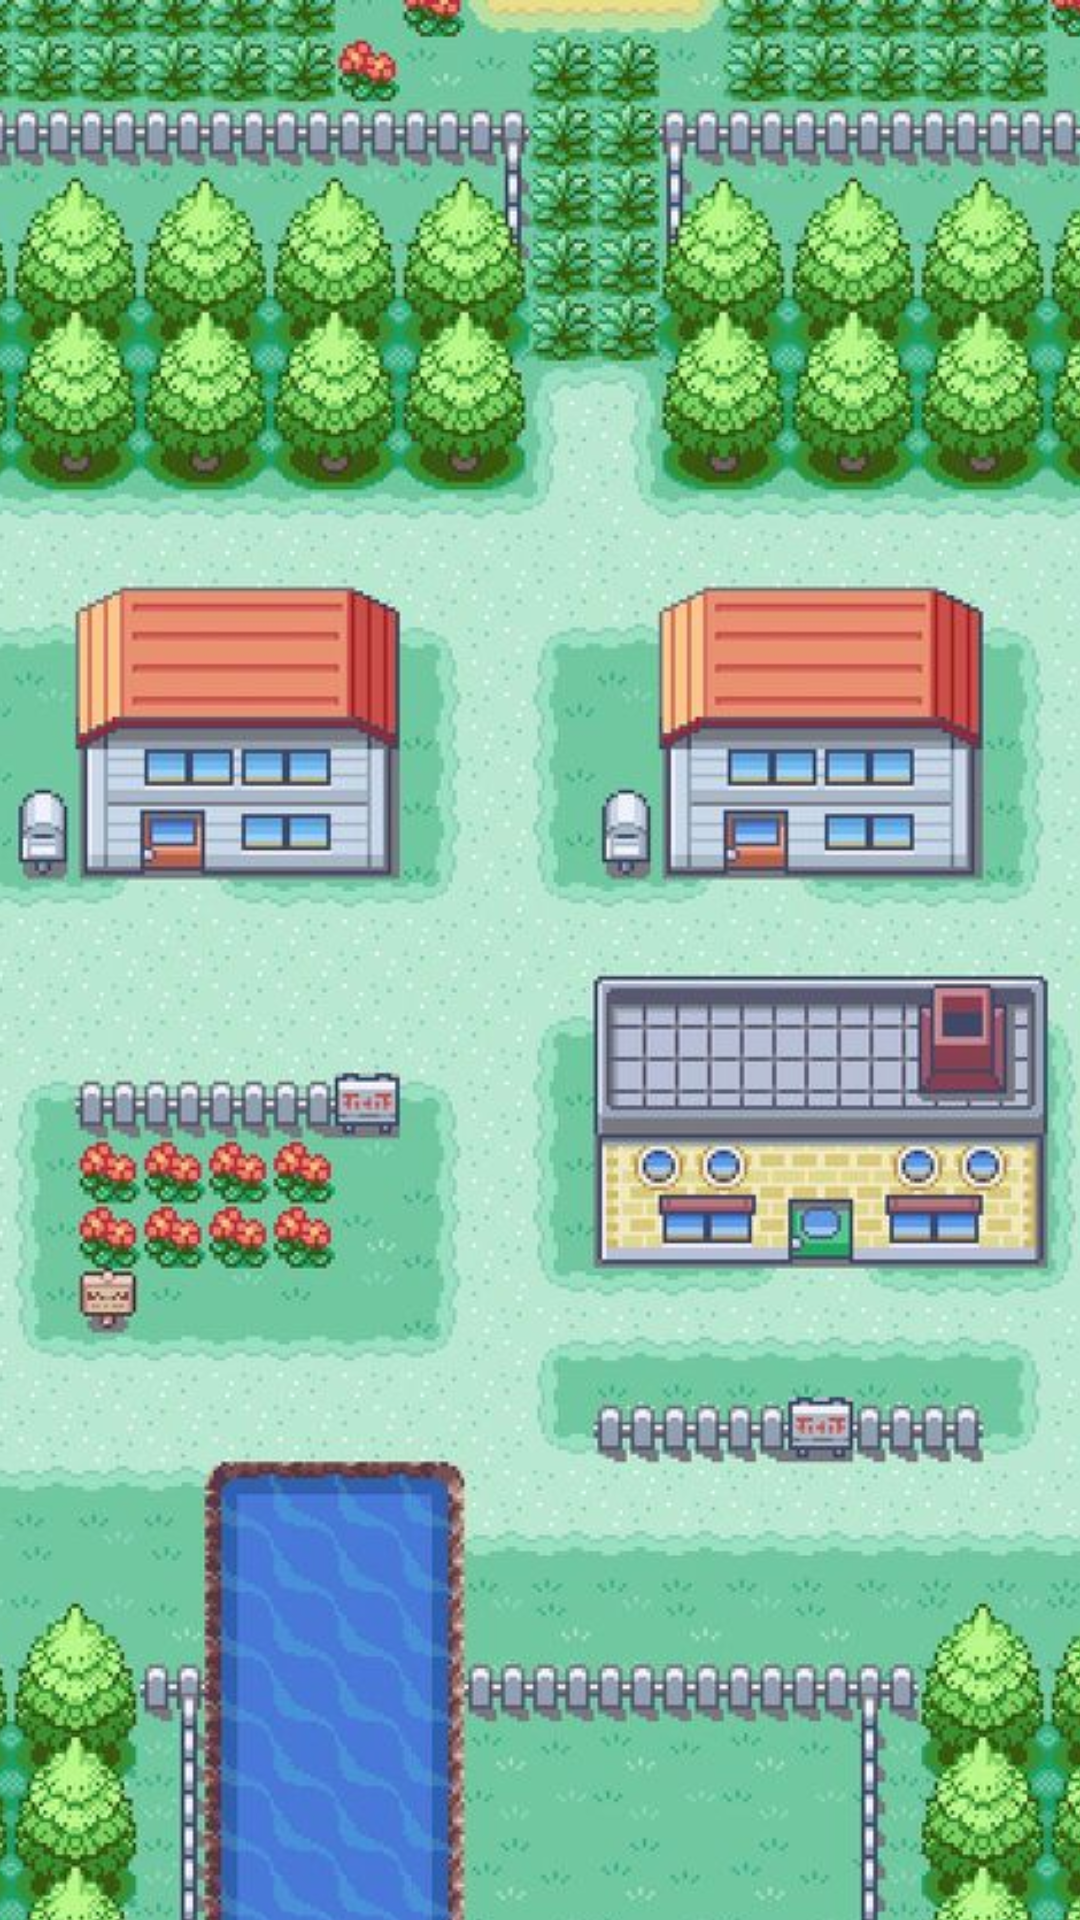 Pallet Town Android Wallpaper (not OC), anyone know where i can find an original Gameboy style one?